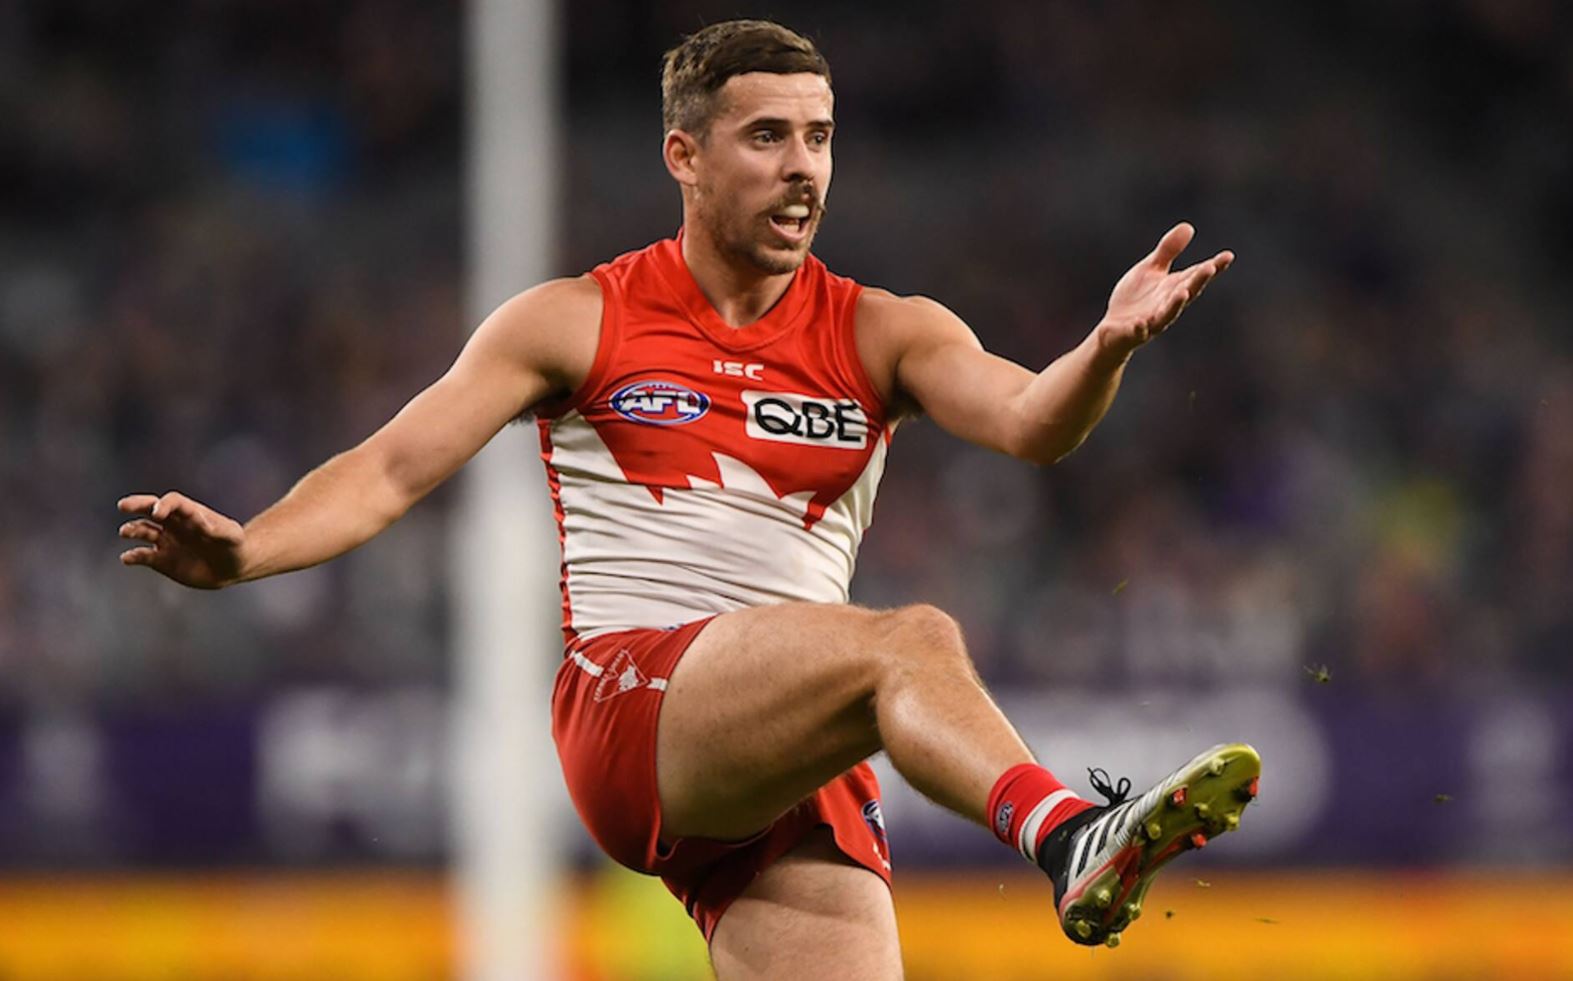 AFL 2022 Daily Fantasy Tips: Round 2 Swans vs Cats